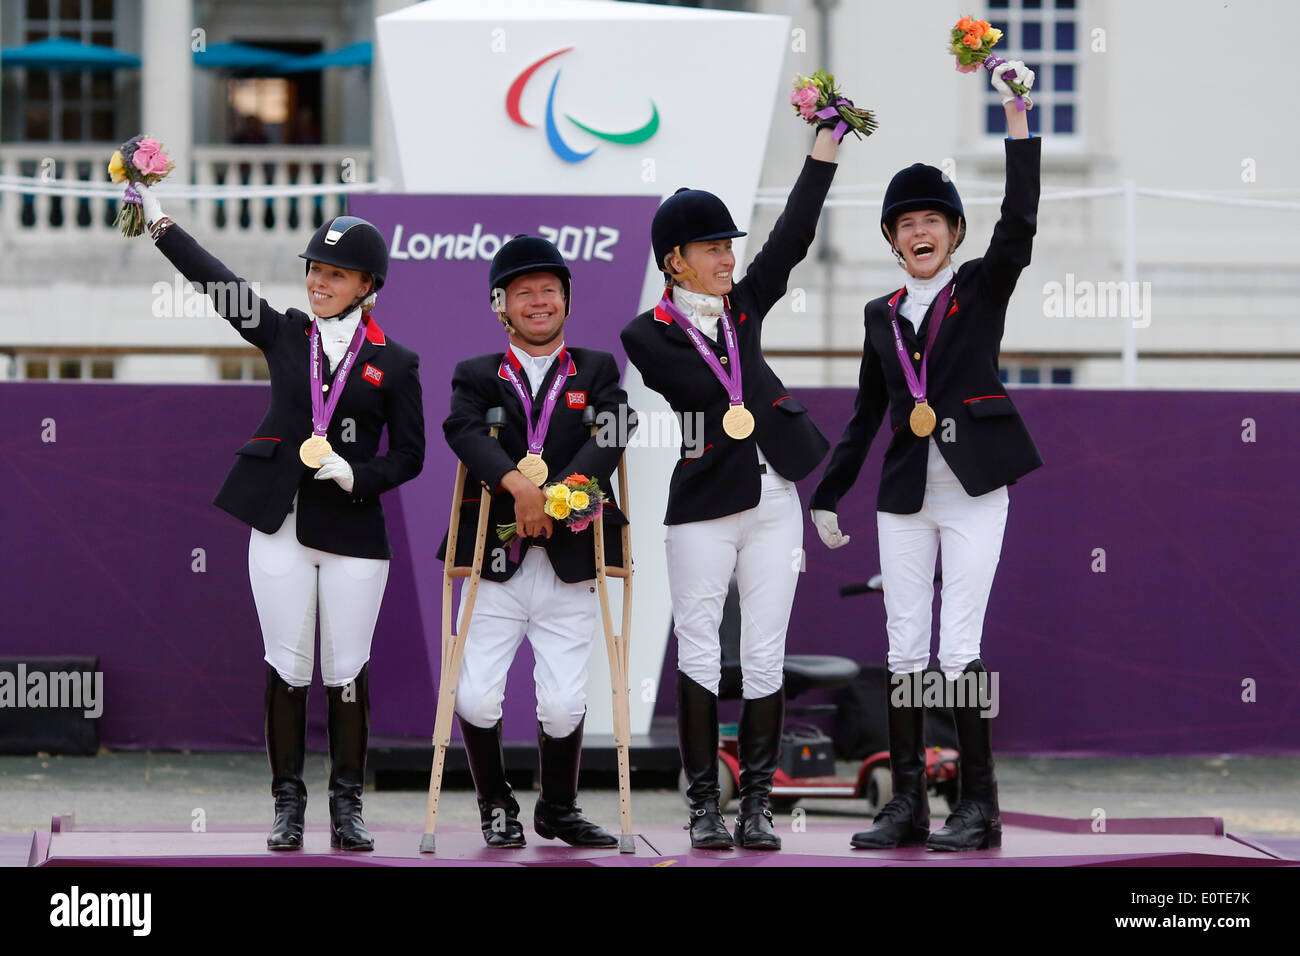 Britain's Equestrian Dressage team champions celebrate on the podium with their gold medals at Greenwich Park during the London 2012 Paralympic Games in London, Britain, 04 September 2012. Stock Photo